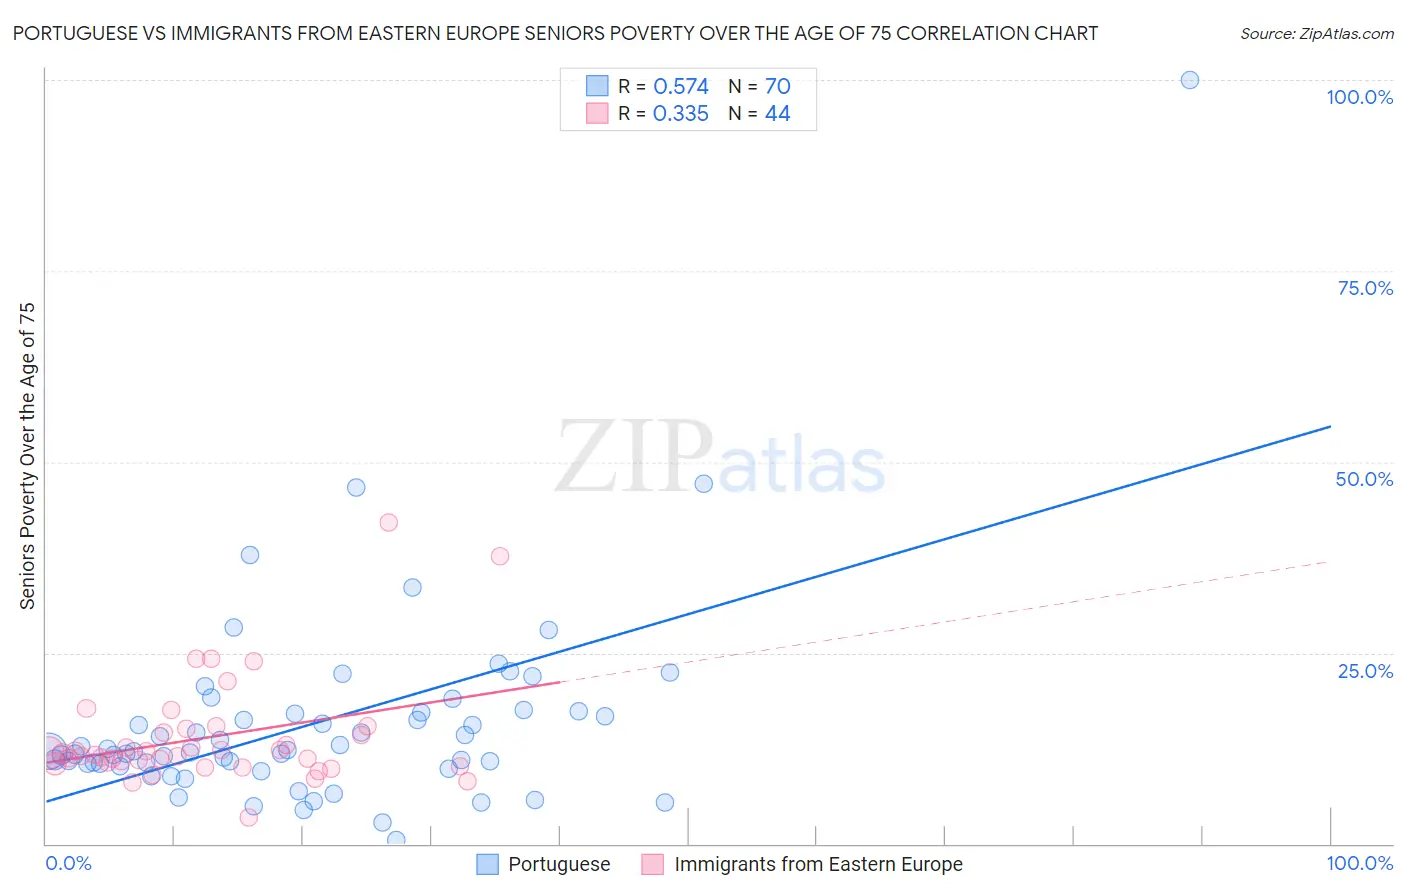 Portuguese vs Immigrants from Eastern Europe Seniors Poverty Over the Age of 75